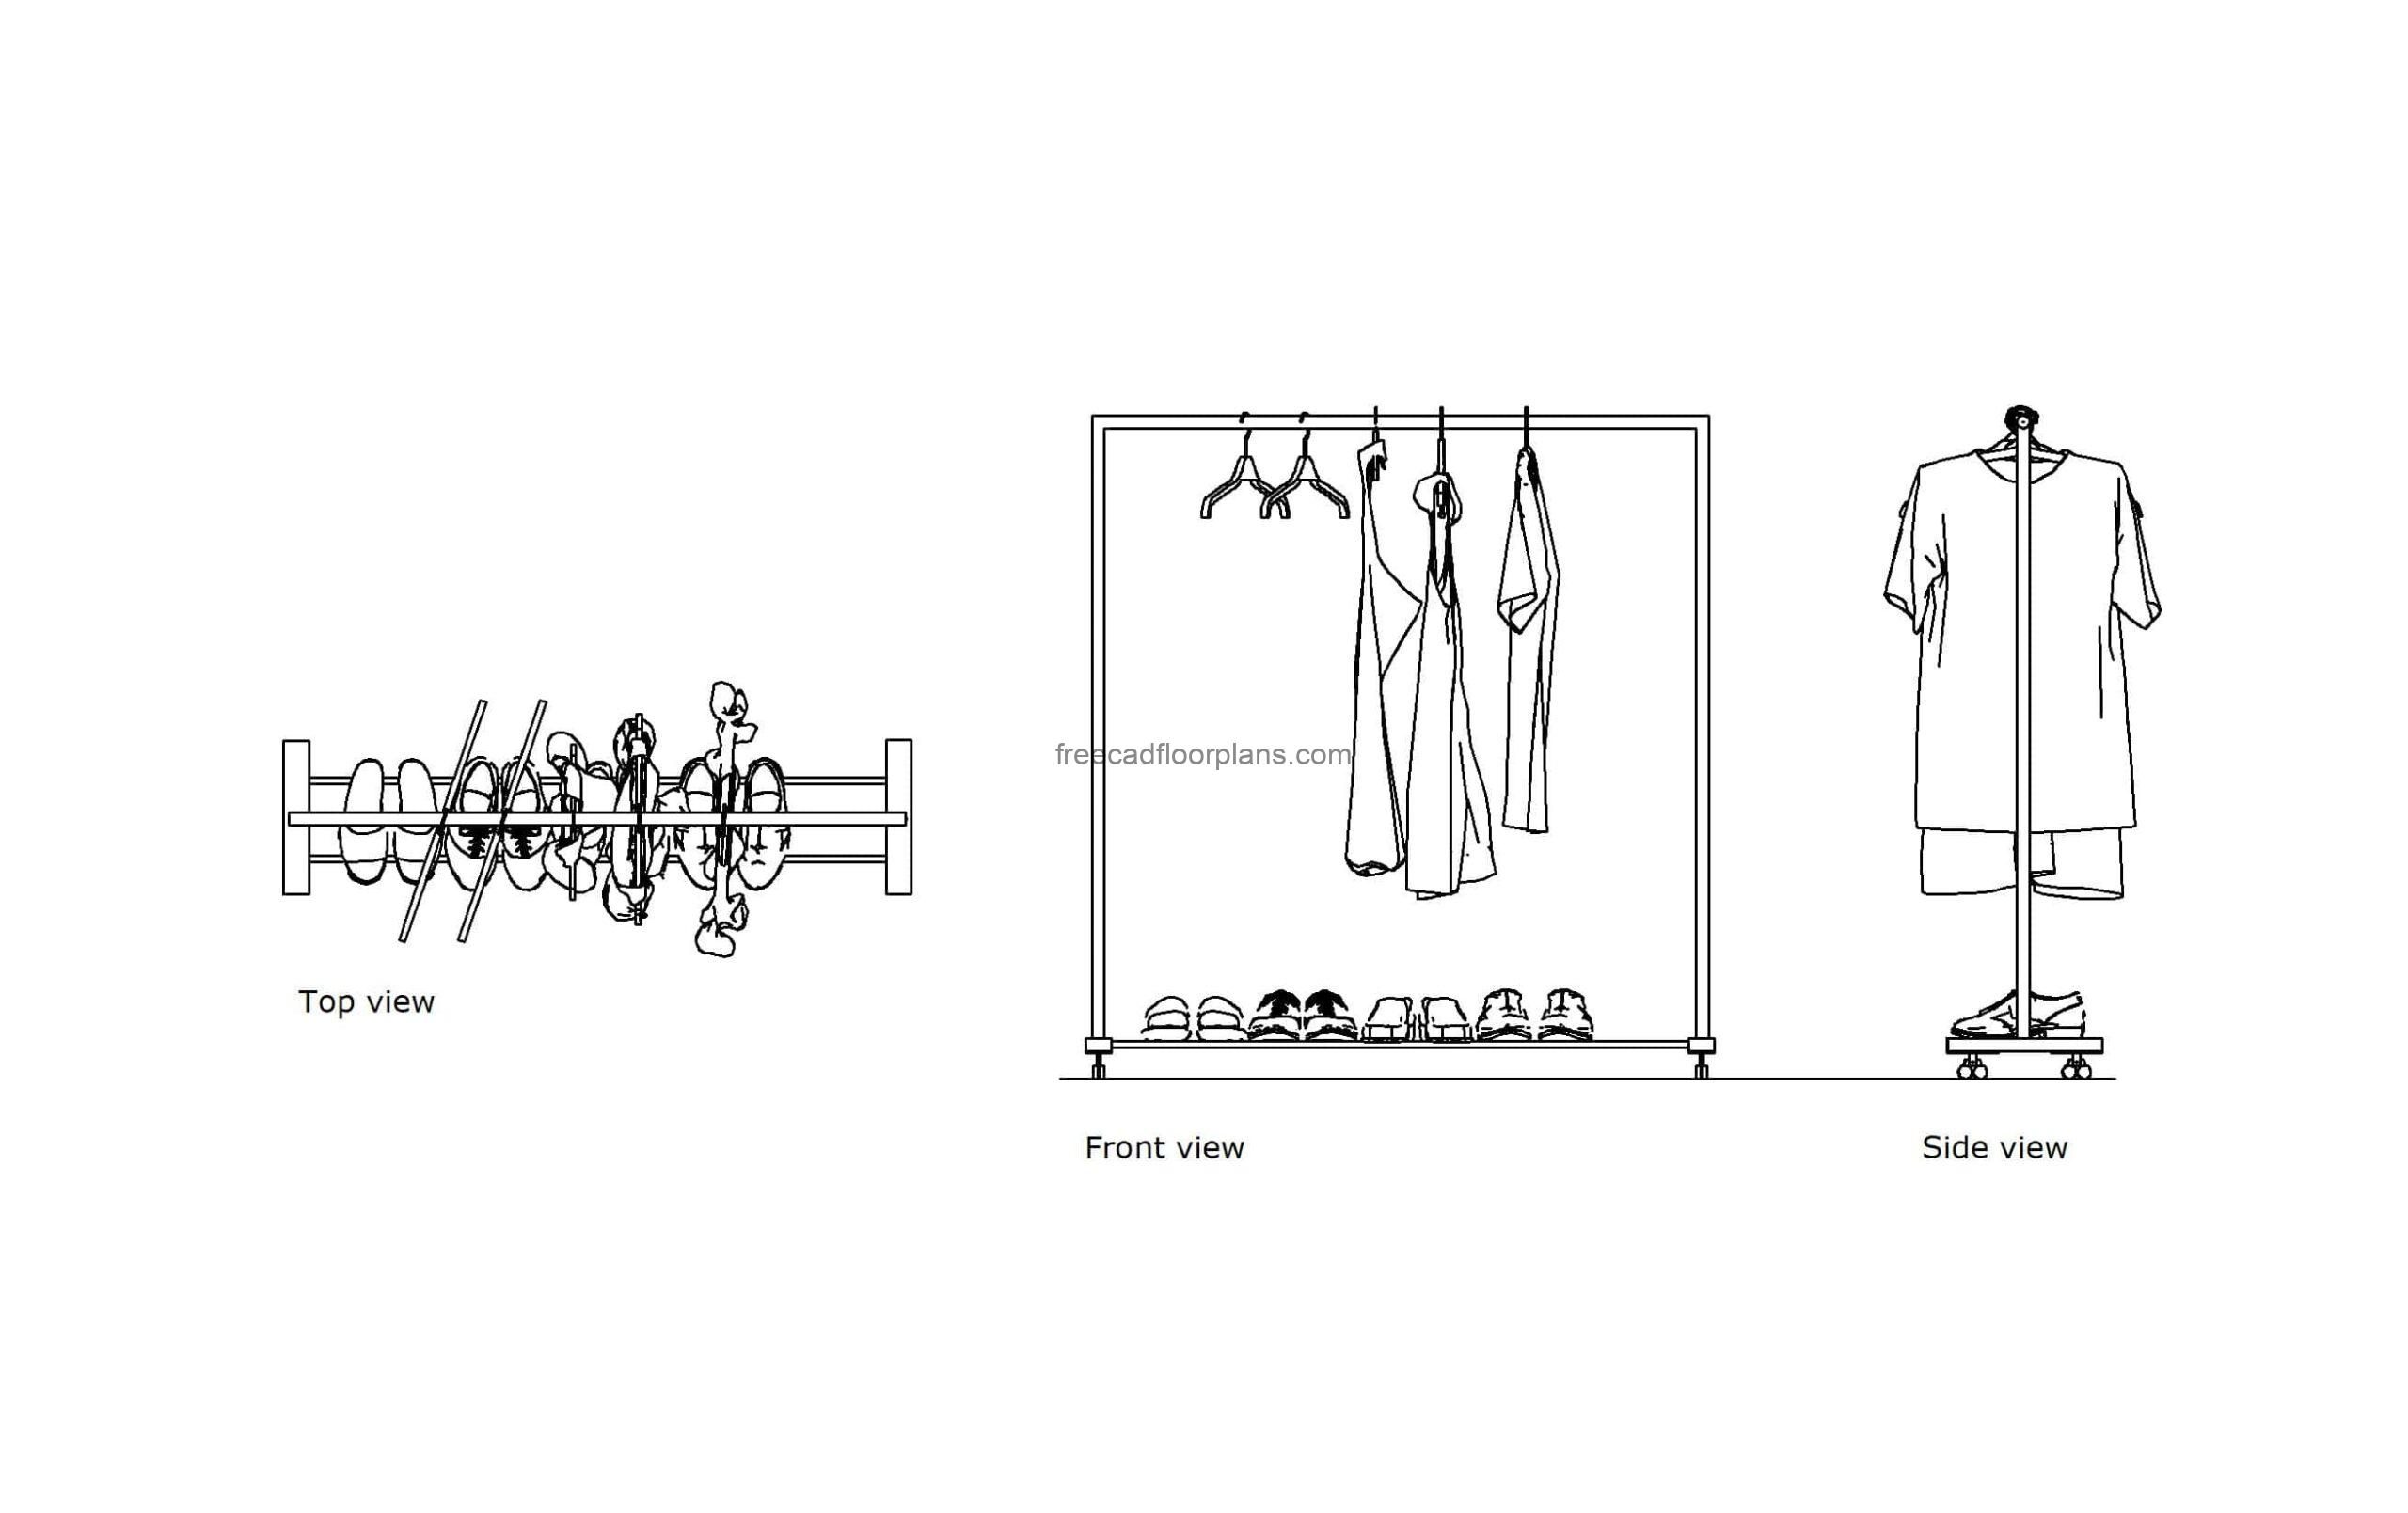 autocad drawing of a cloth hanger, plan and elevation 2d views, dwg file free for download